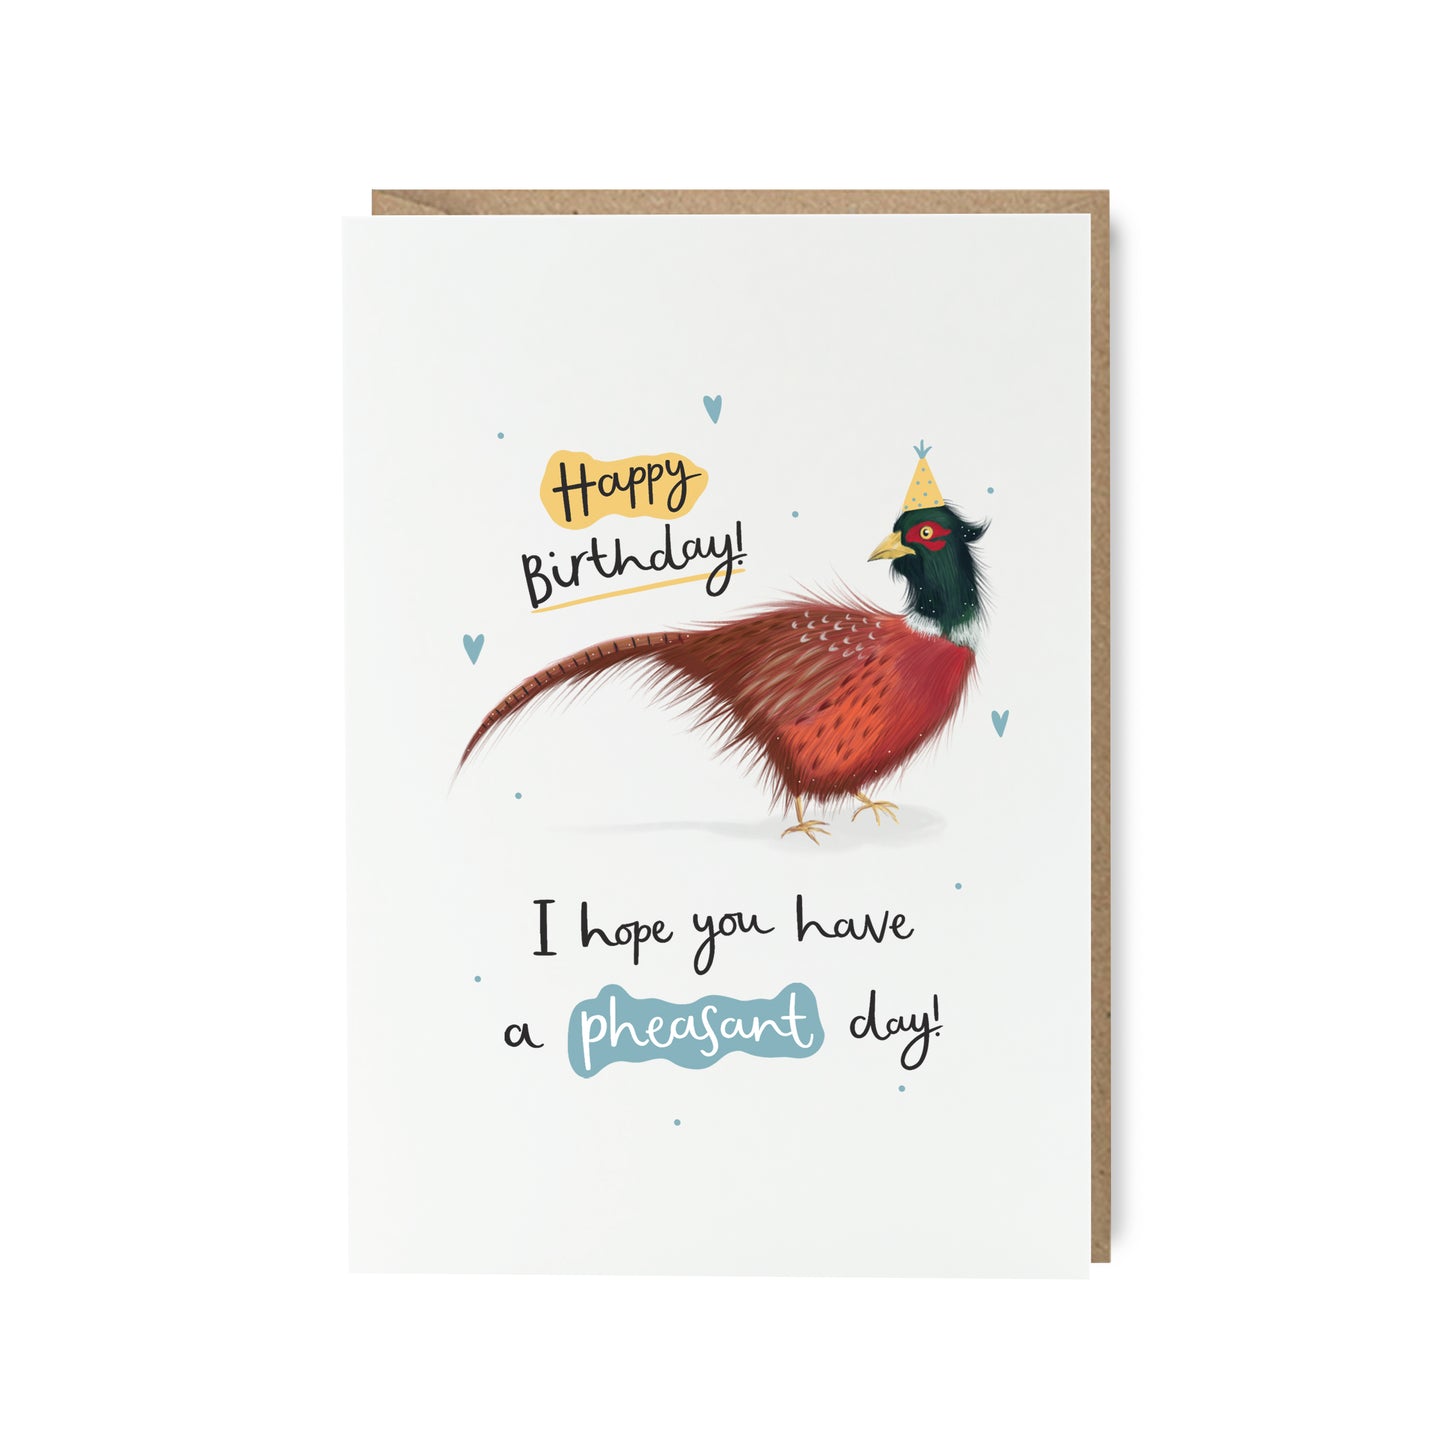 Pheasant day funny pun birthday card by abbie imagine